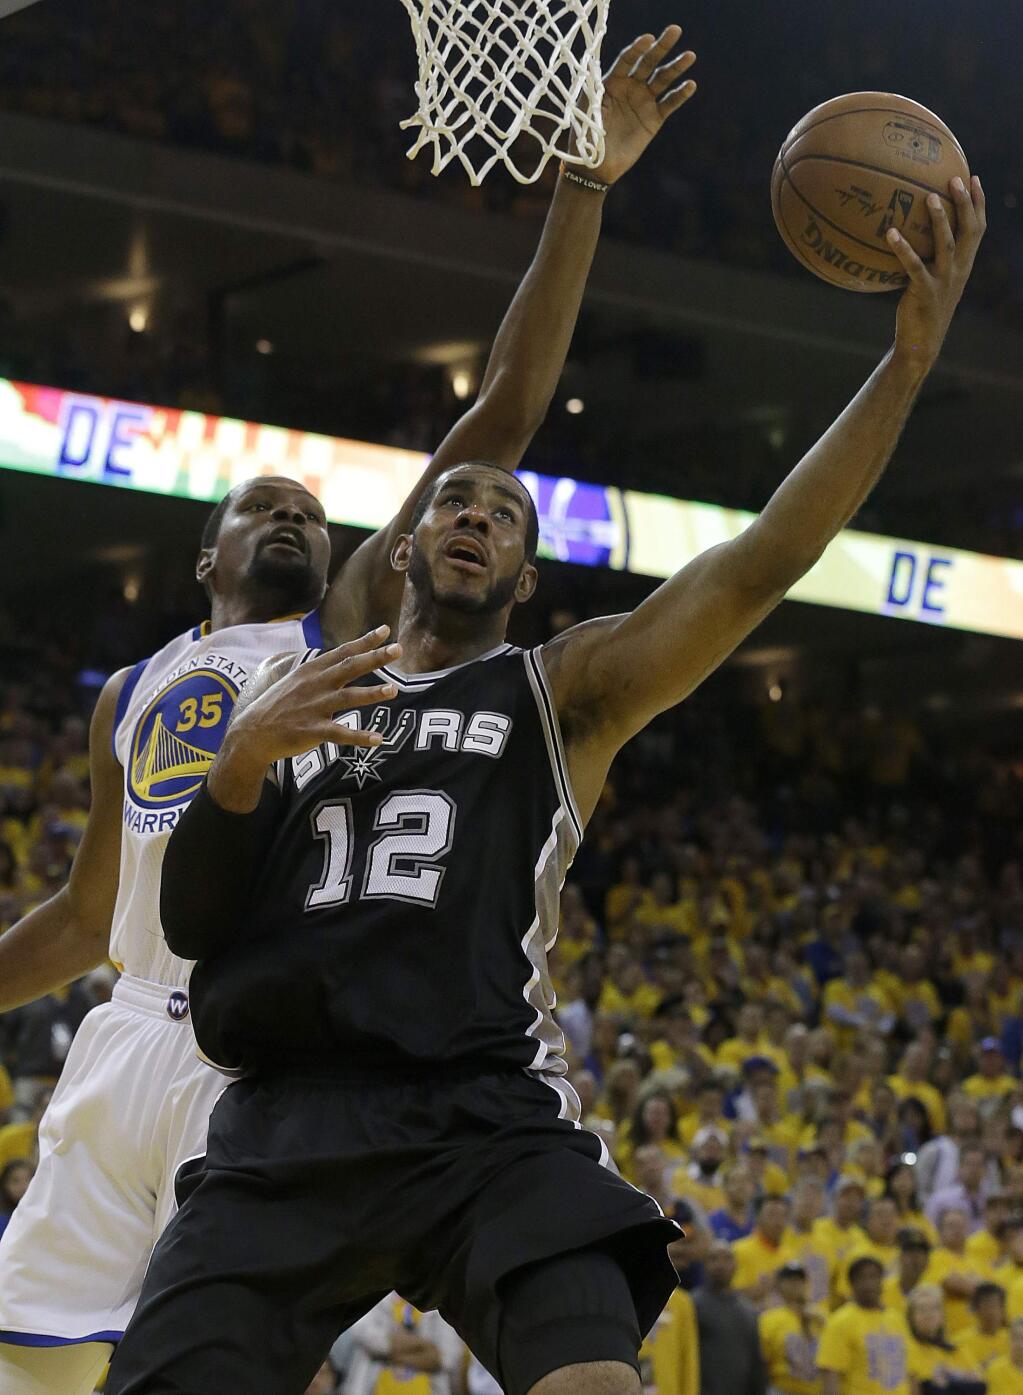 San Antonio Spurs forward LaMarcus Aldridge (12) shoots against Golden State Warriors forward Kevin Durant during the second half of Game 1 of the NBA basketball Western Conference finals in Oakland, Calif., Sunday, May 14, 2017. The Warriors won 113-111. (AP Photo/Jeff Chiu)